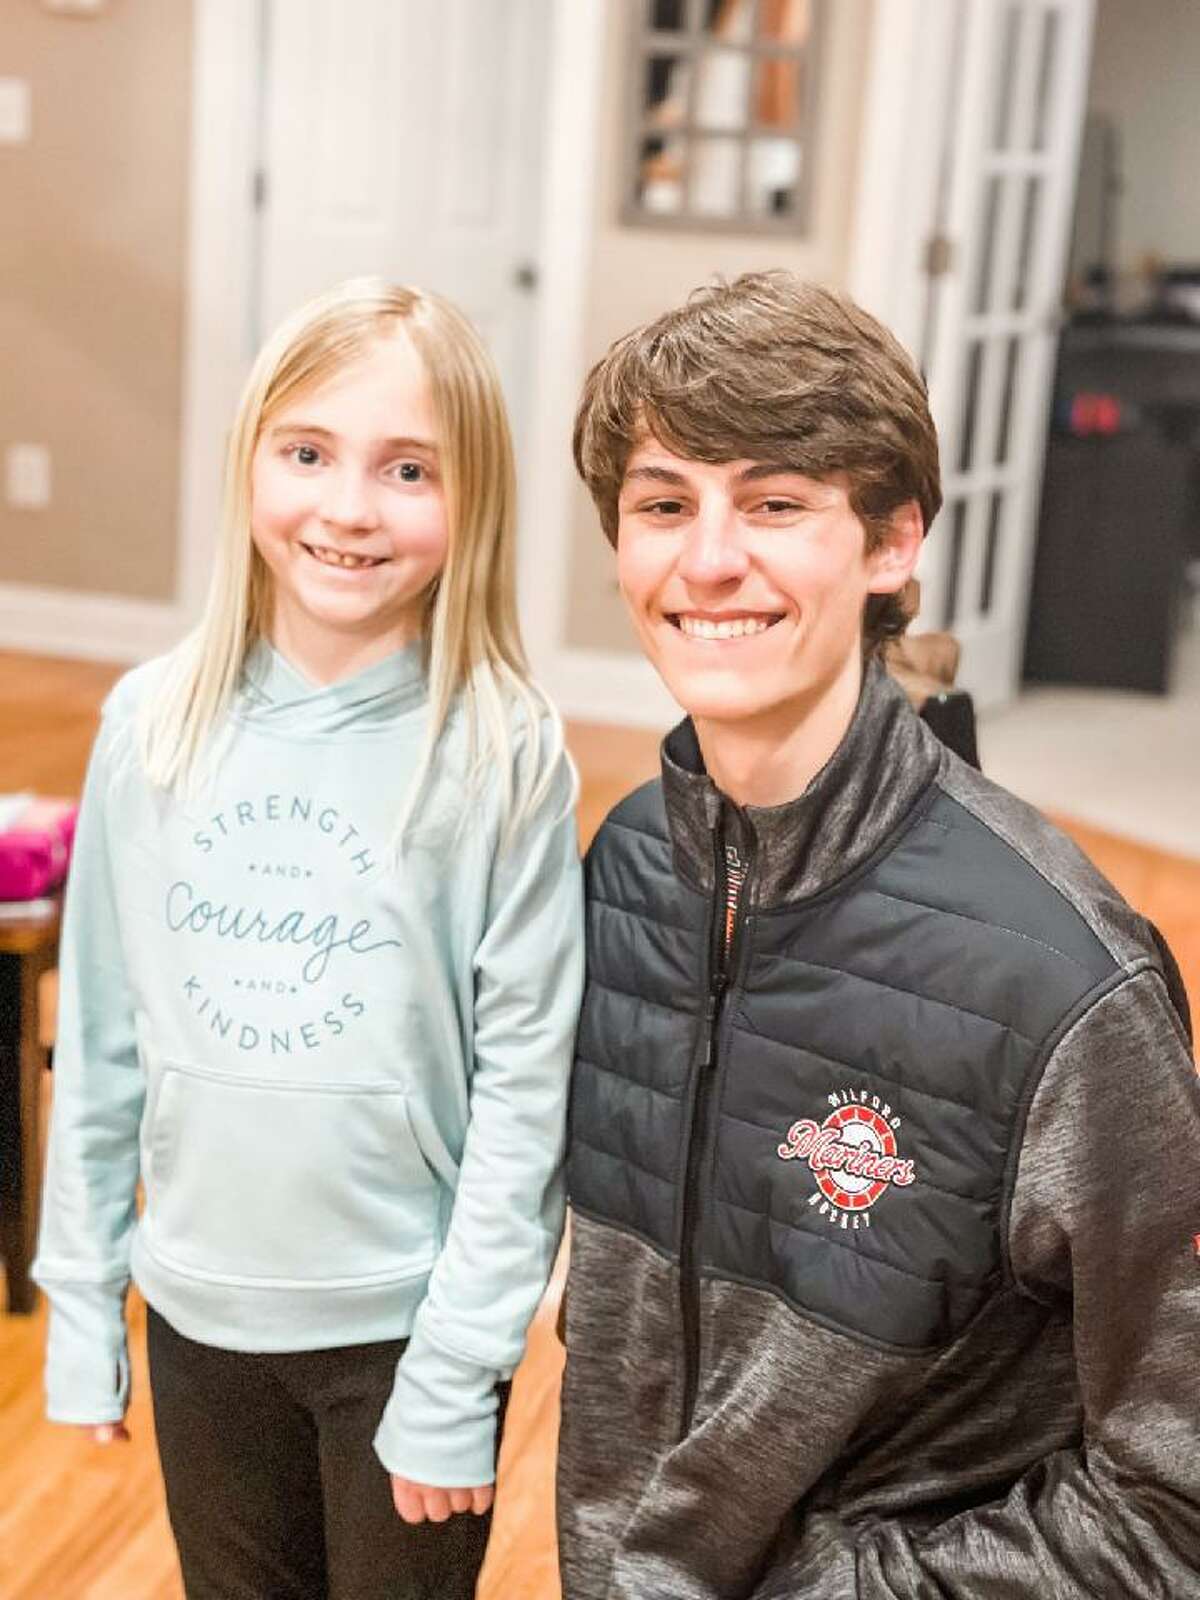 Foran’s Joey Honcz, right, with Avery Lafferty, age 9, who was recently diagnosed with a brain tumor. “Joey has been great with Avery,” says his mother, Christina. “... There was a walk in her honor, The Cure Starts Now, and he came afterward to the house to spend time with her.